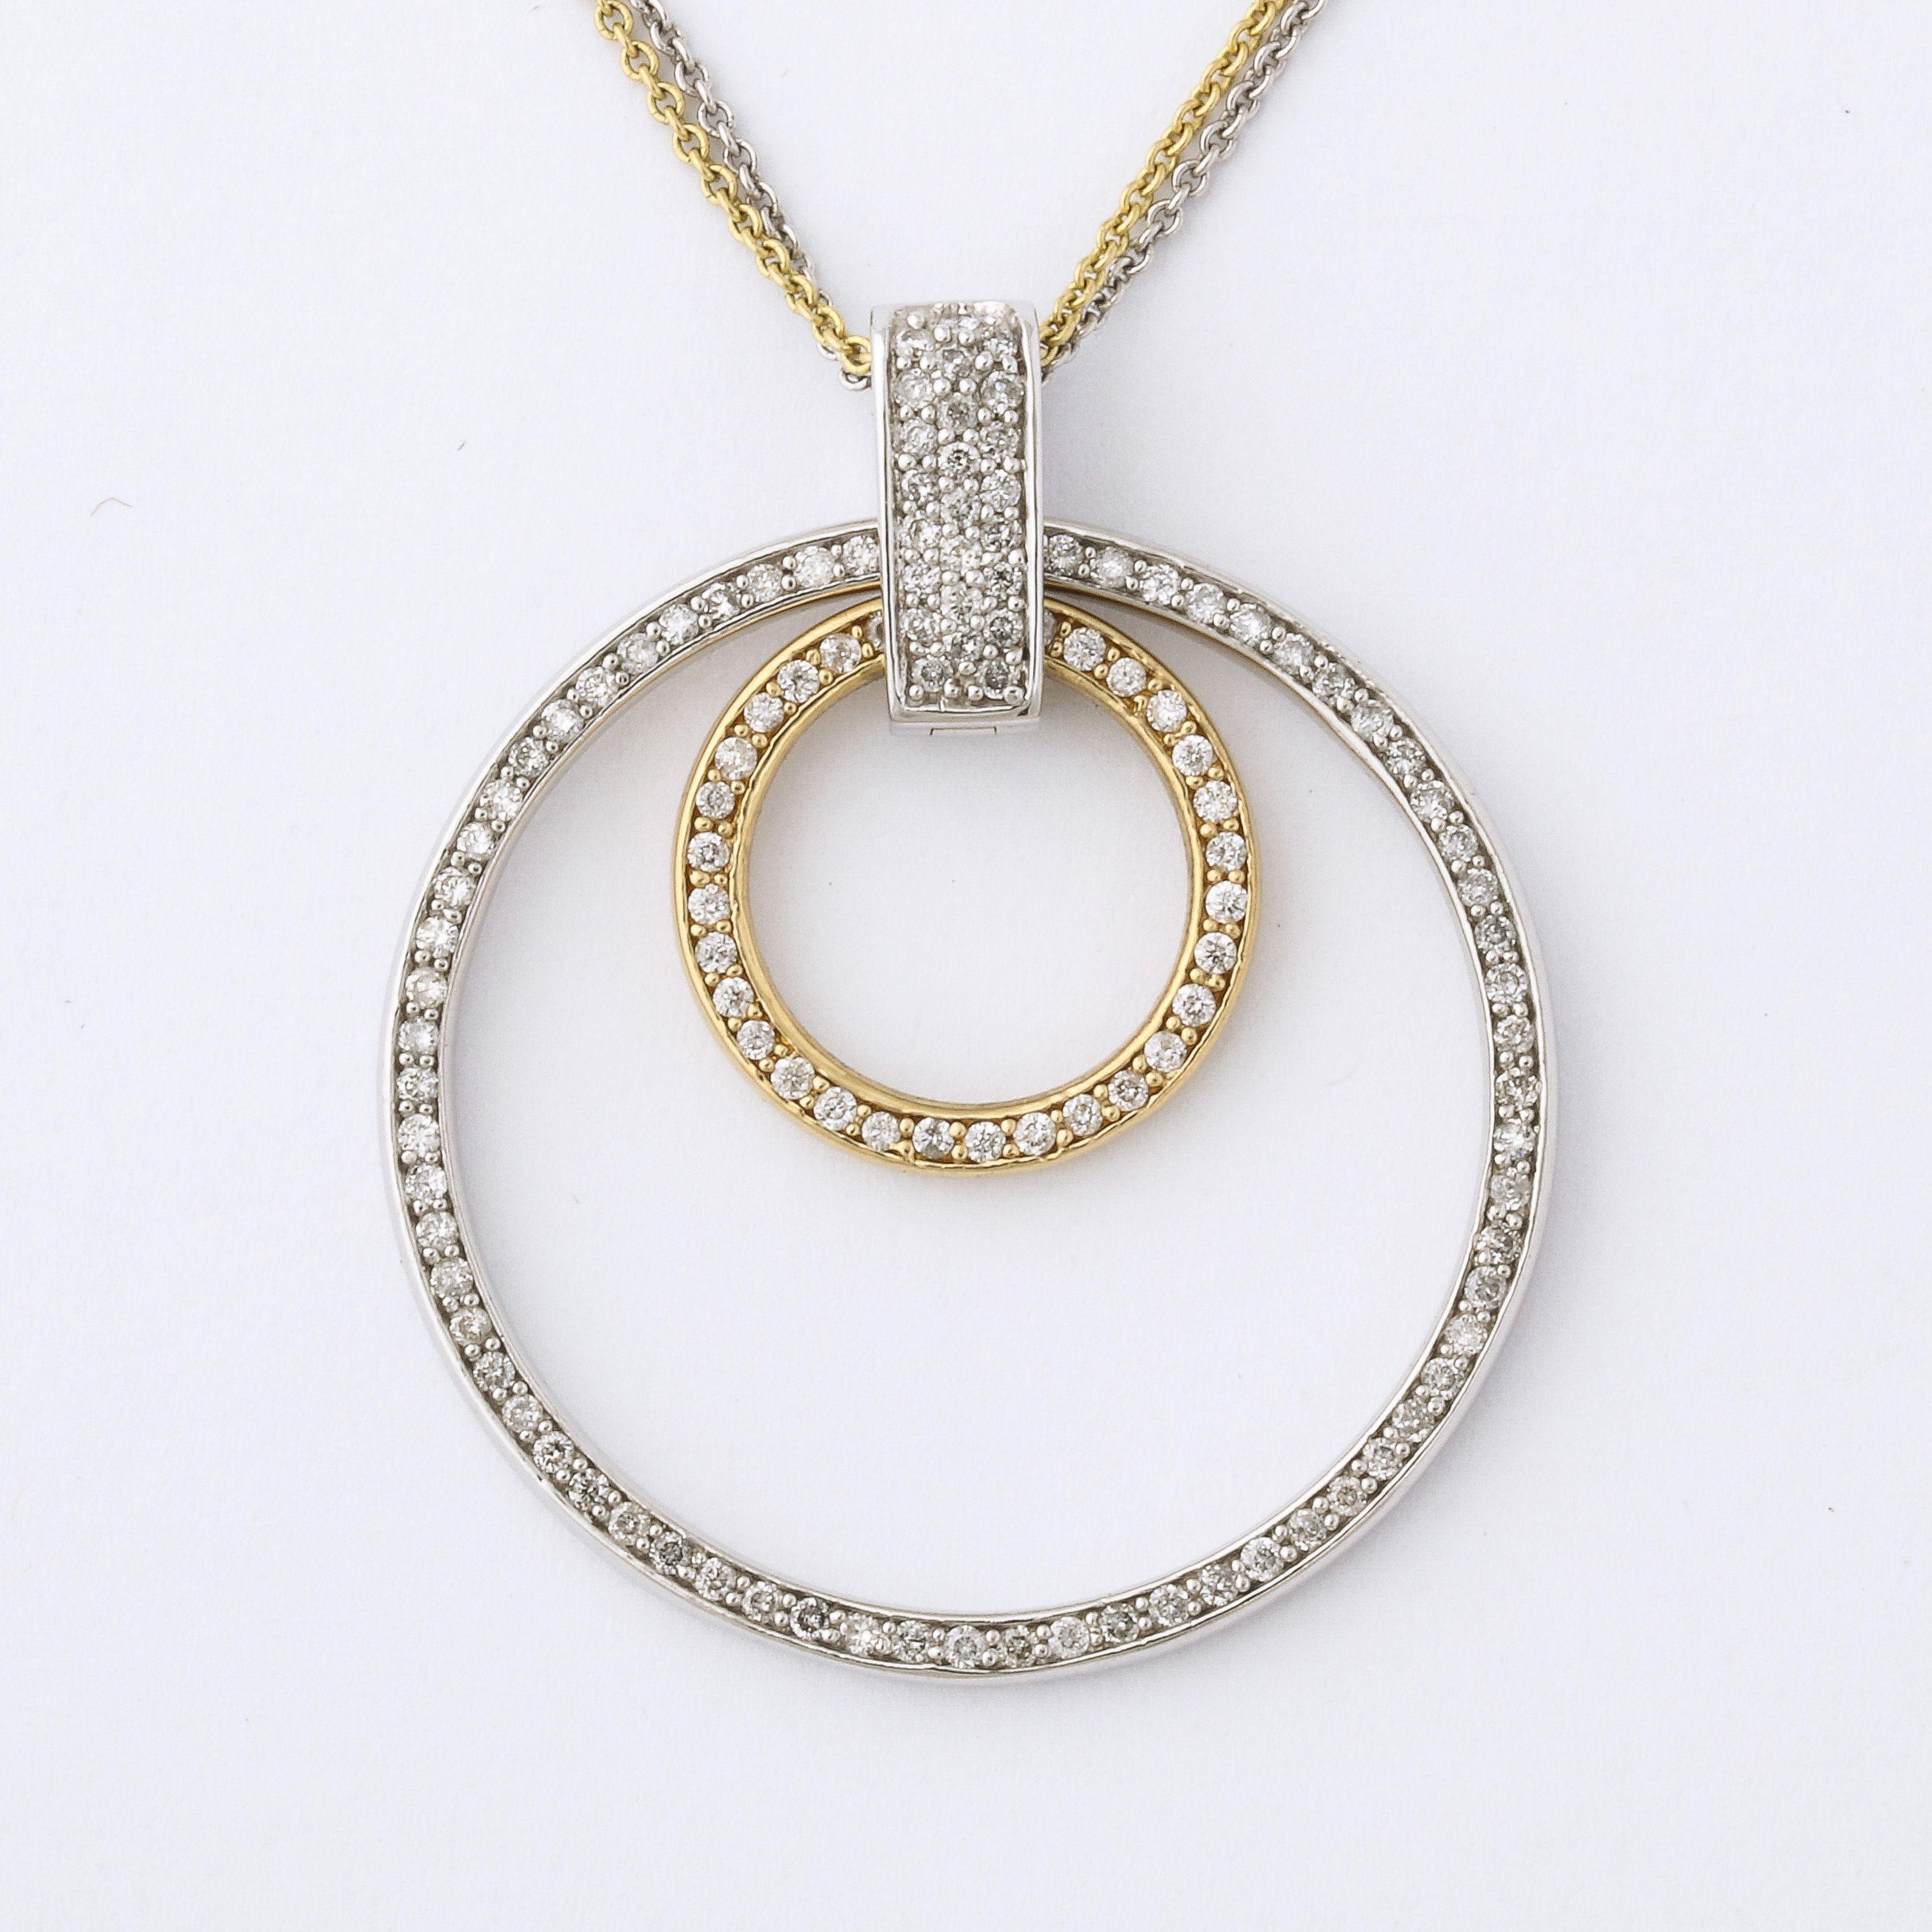 Modern White and Yellow Gold Diamond Necklace